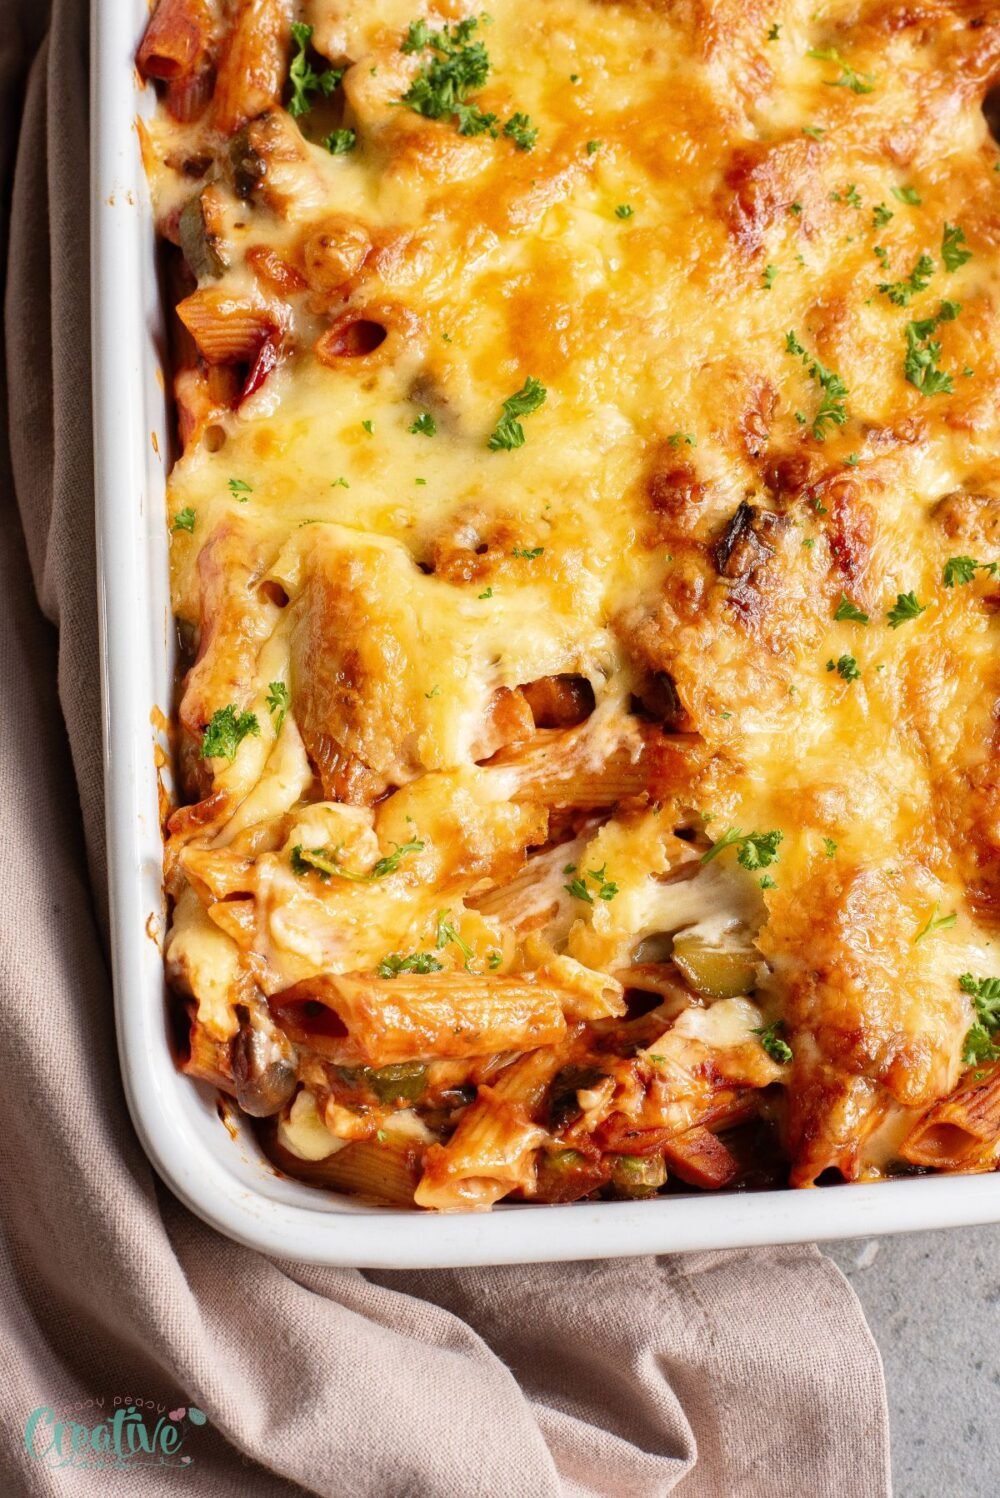 Enjoy the ultimate comfort food with a creamy baked pasta loaded with veggies, ham, and melted cheese.